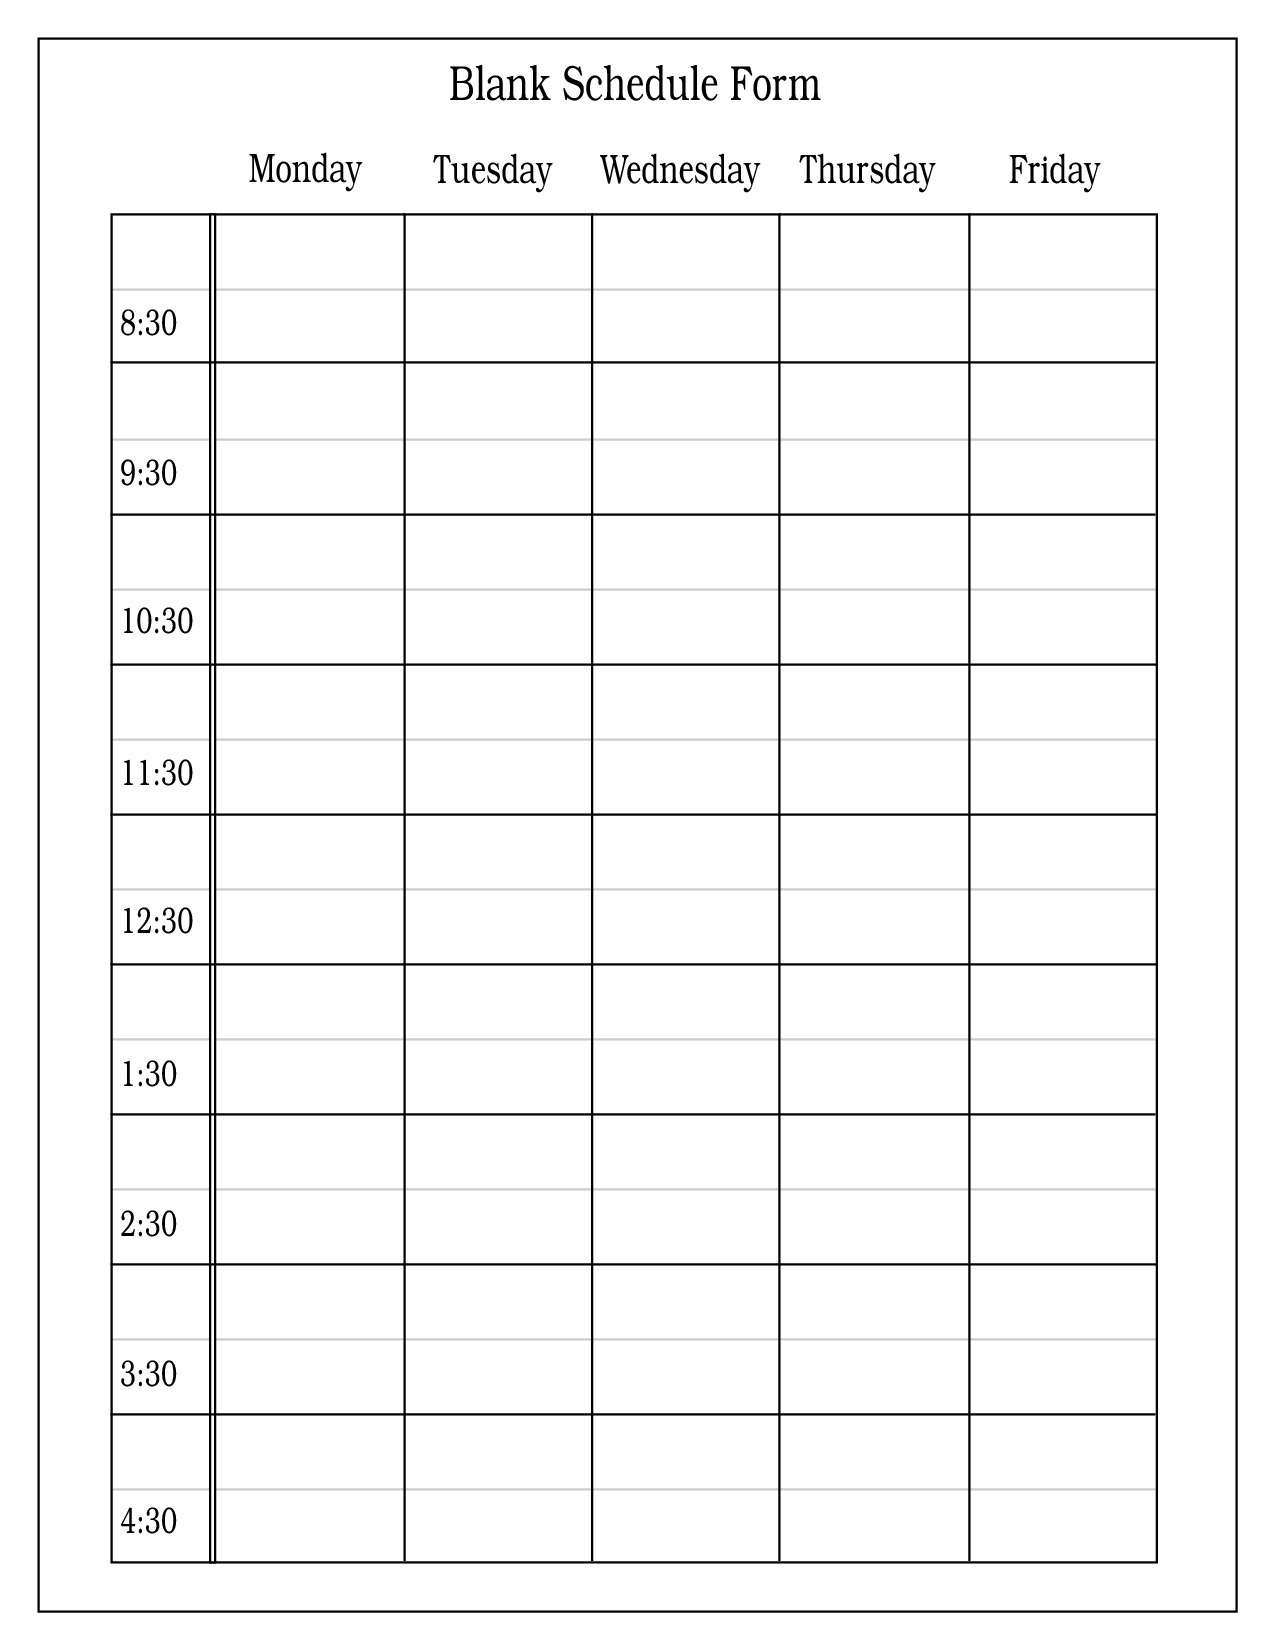 Blank Copy Of Monthly Sign Up Sheet Calendar Schedule | Template regarding Blank Copy Of Monthly Sign Up Sheet Calendar Schedule